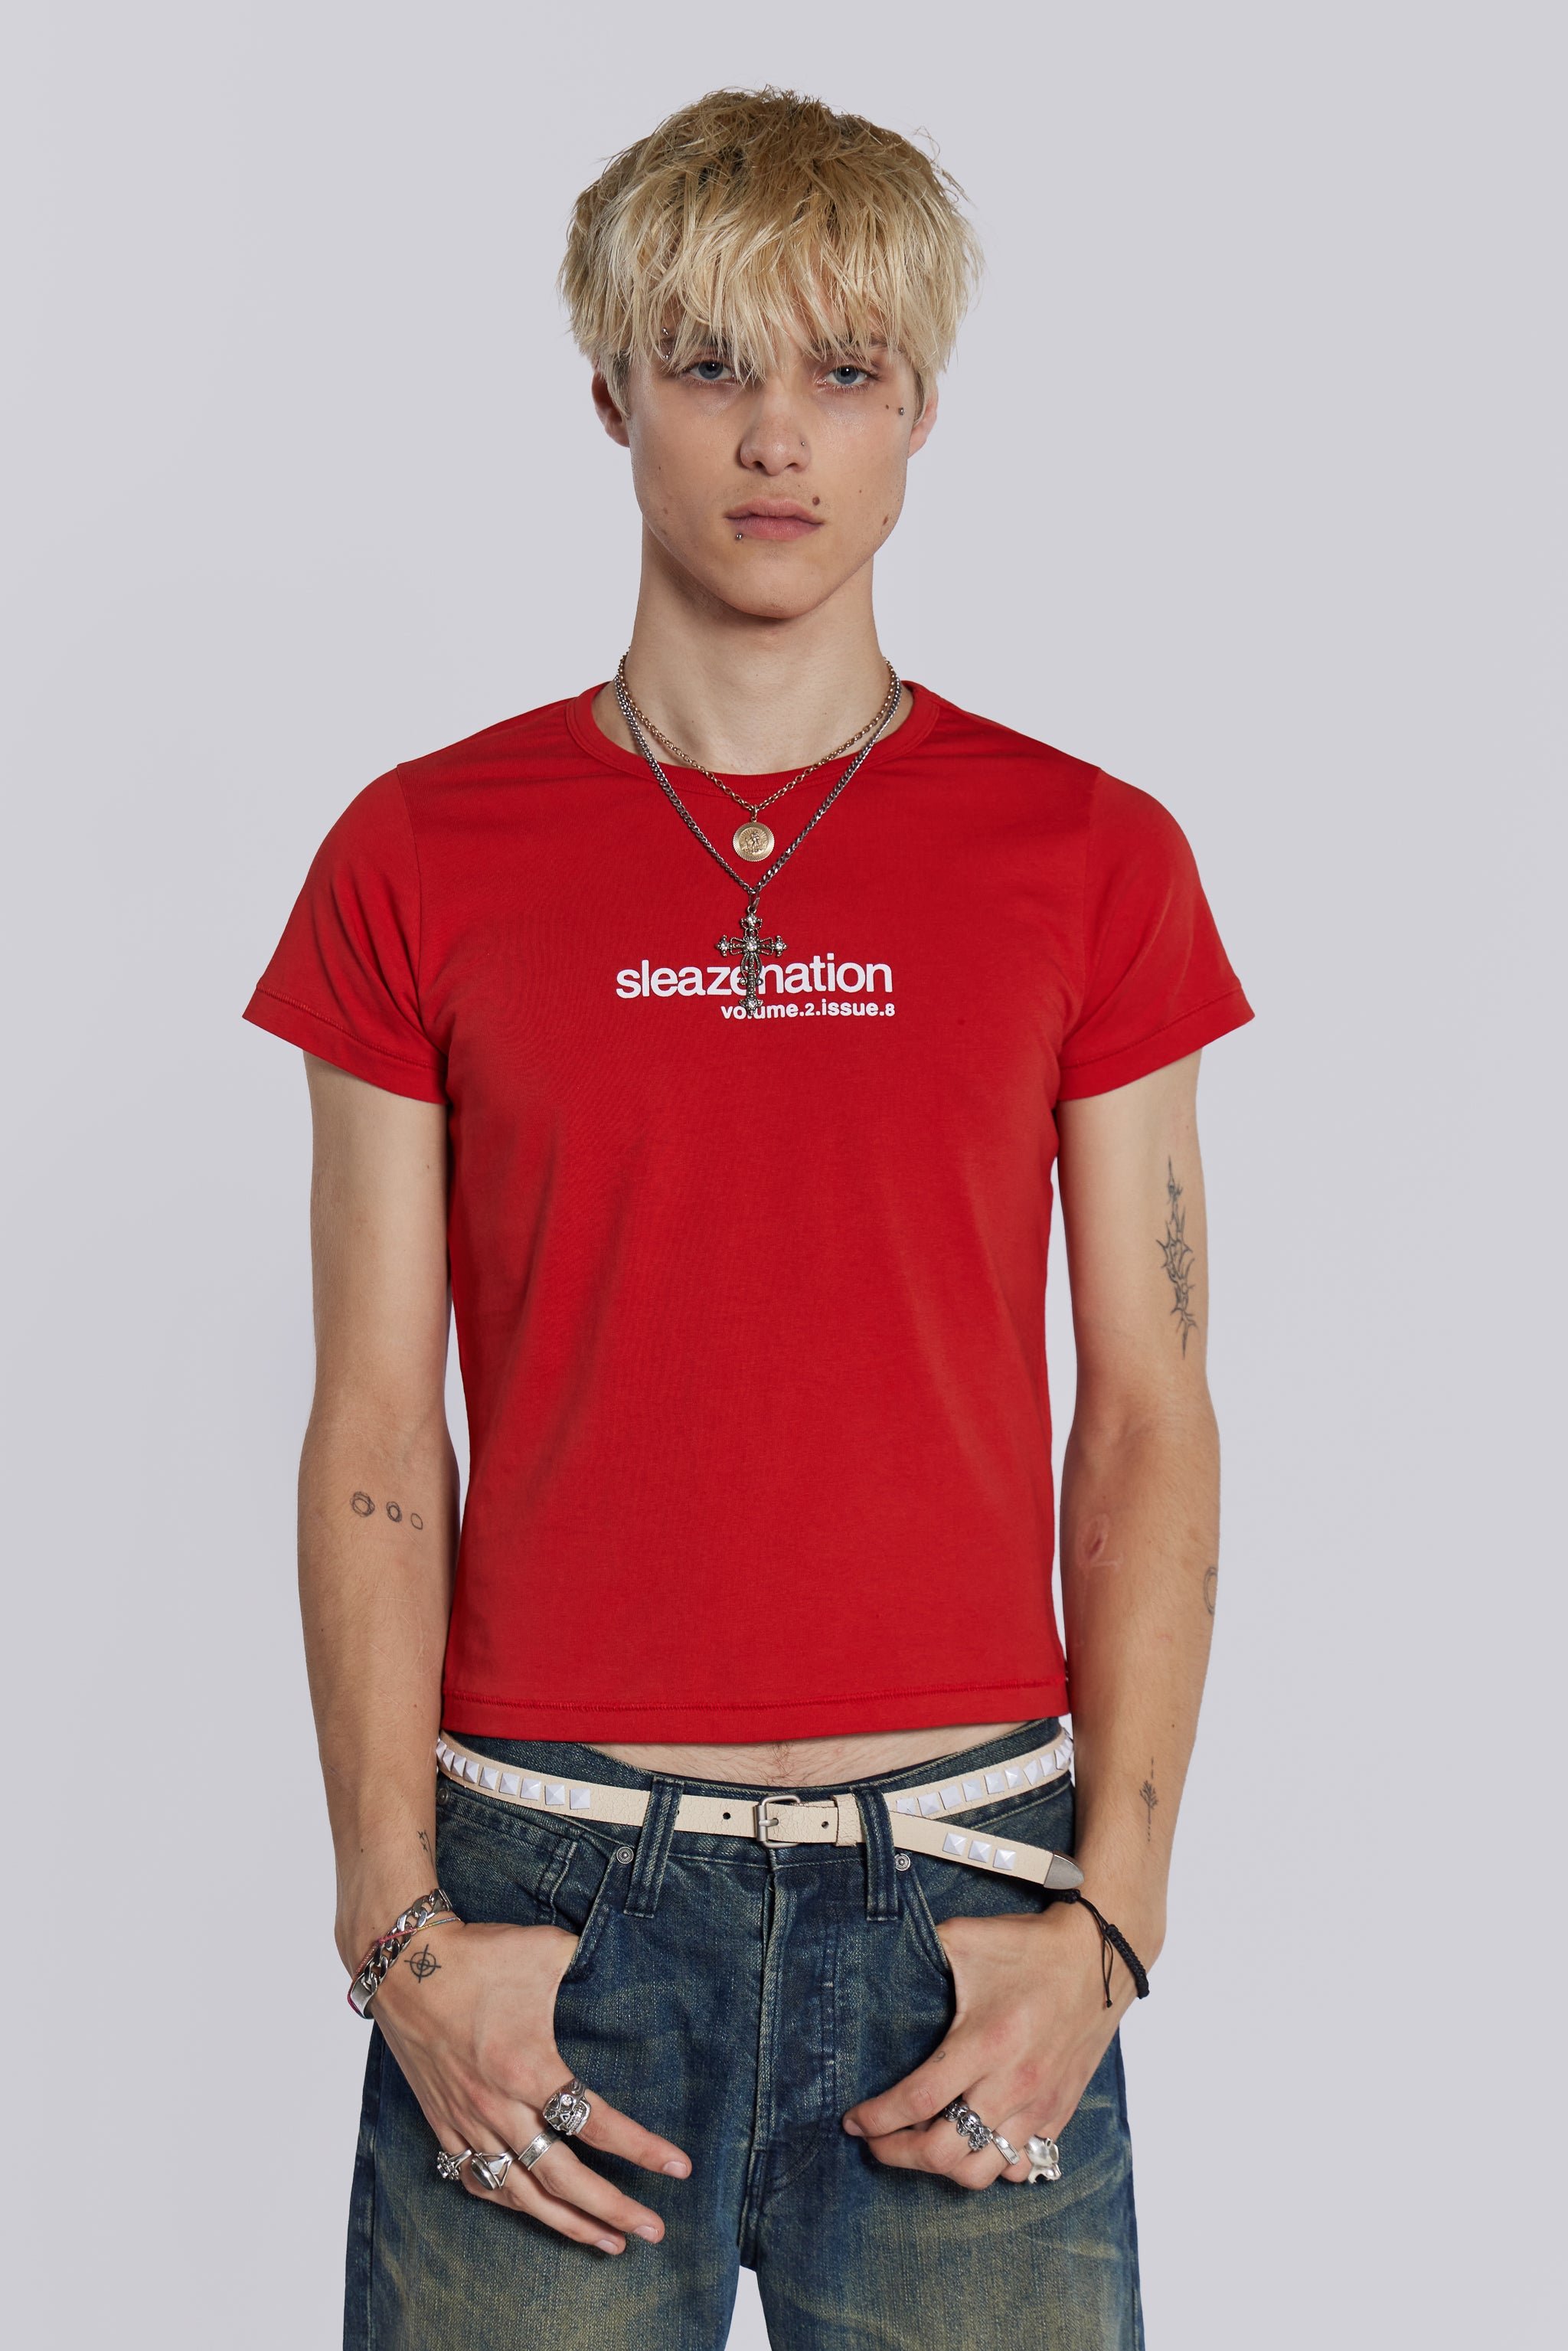 Male model wearing red shrunken short sleeve t-shirt, with Sleazenation printed graphic.